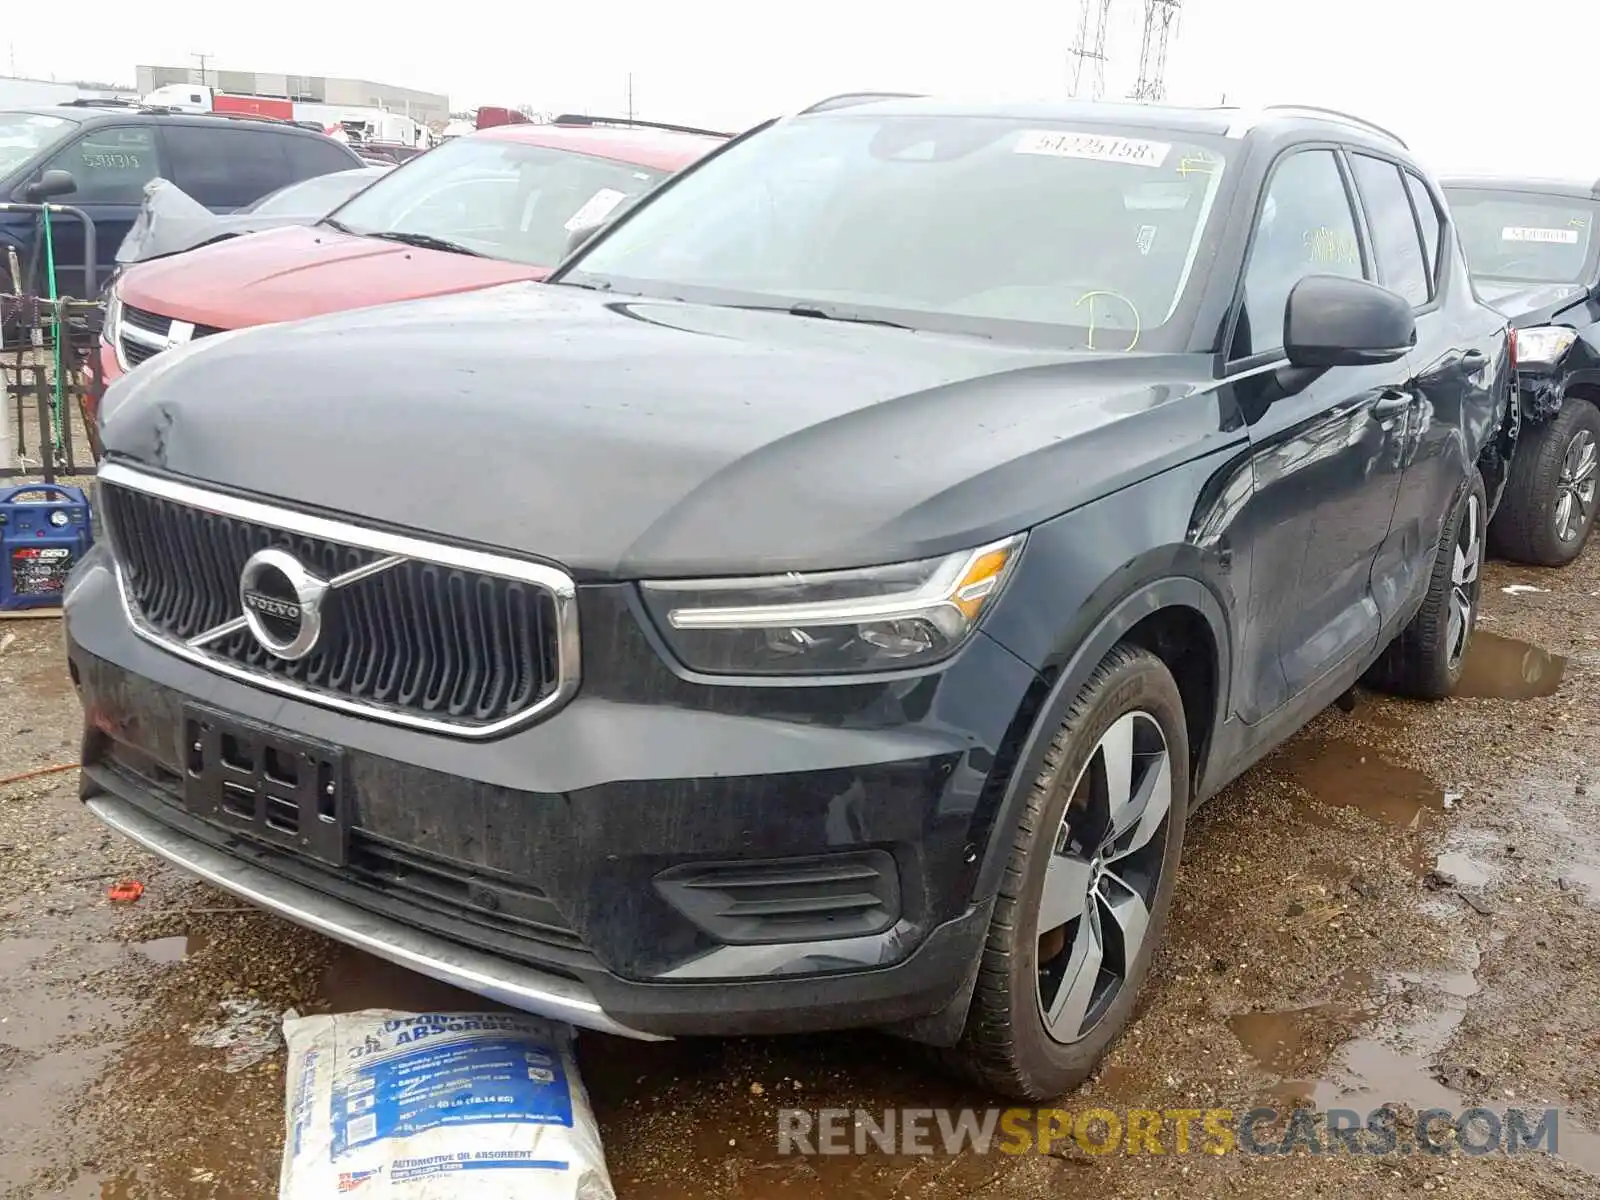 2 Photograph of a damaged car YV4162UK3K2053709 VOLVO XC40 T5 2019